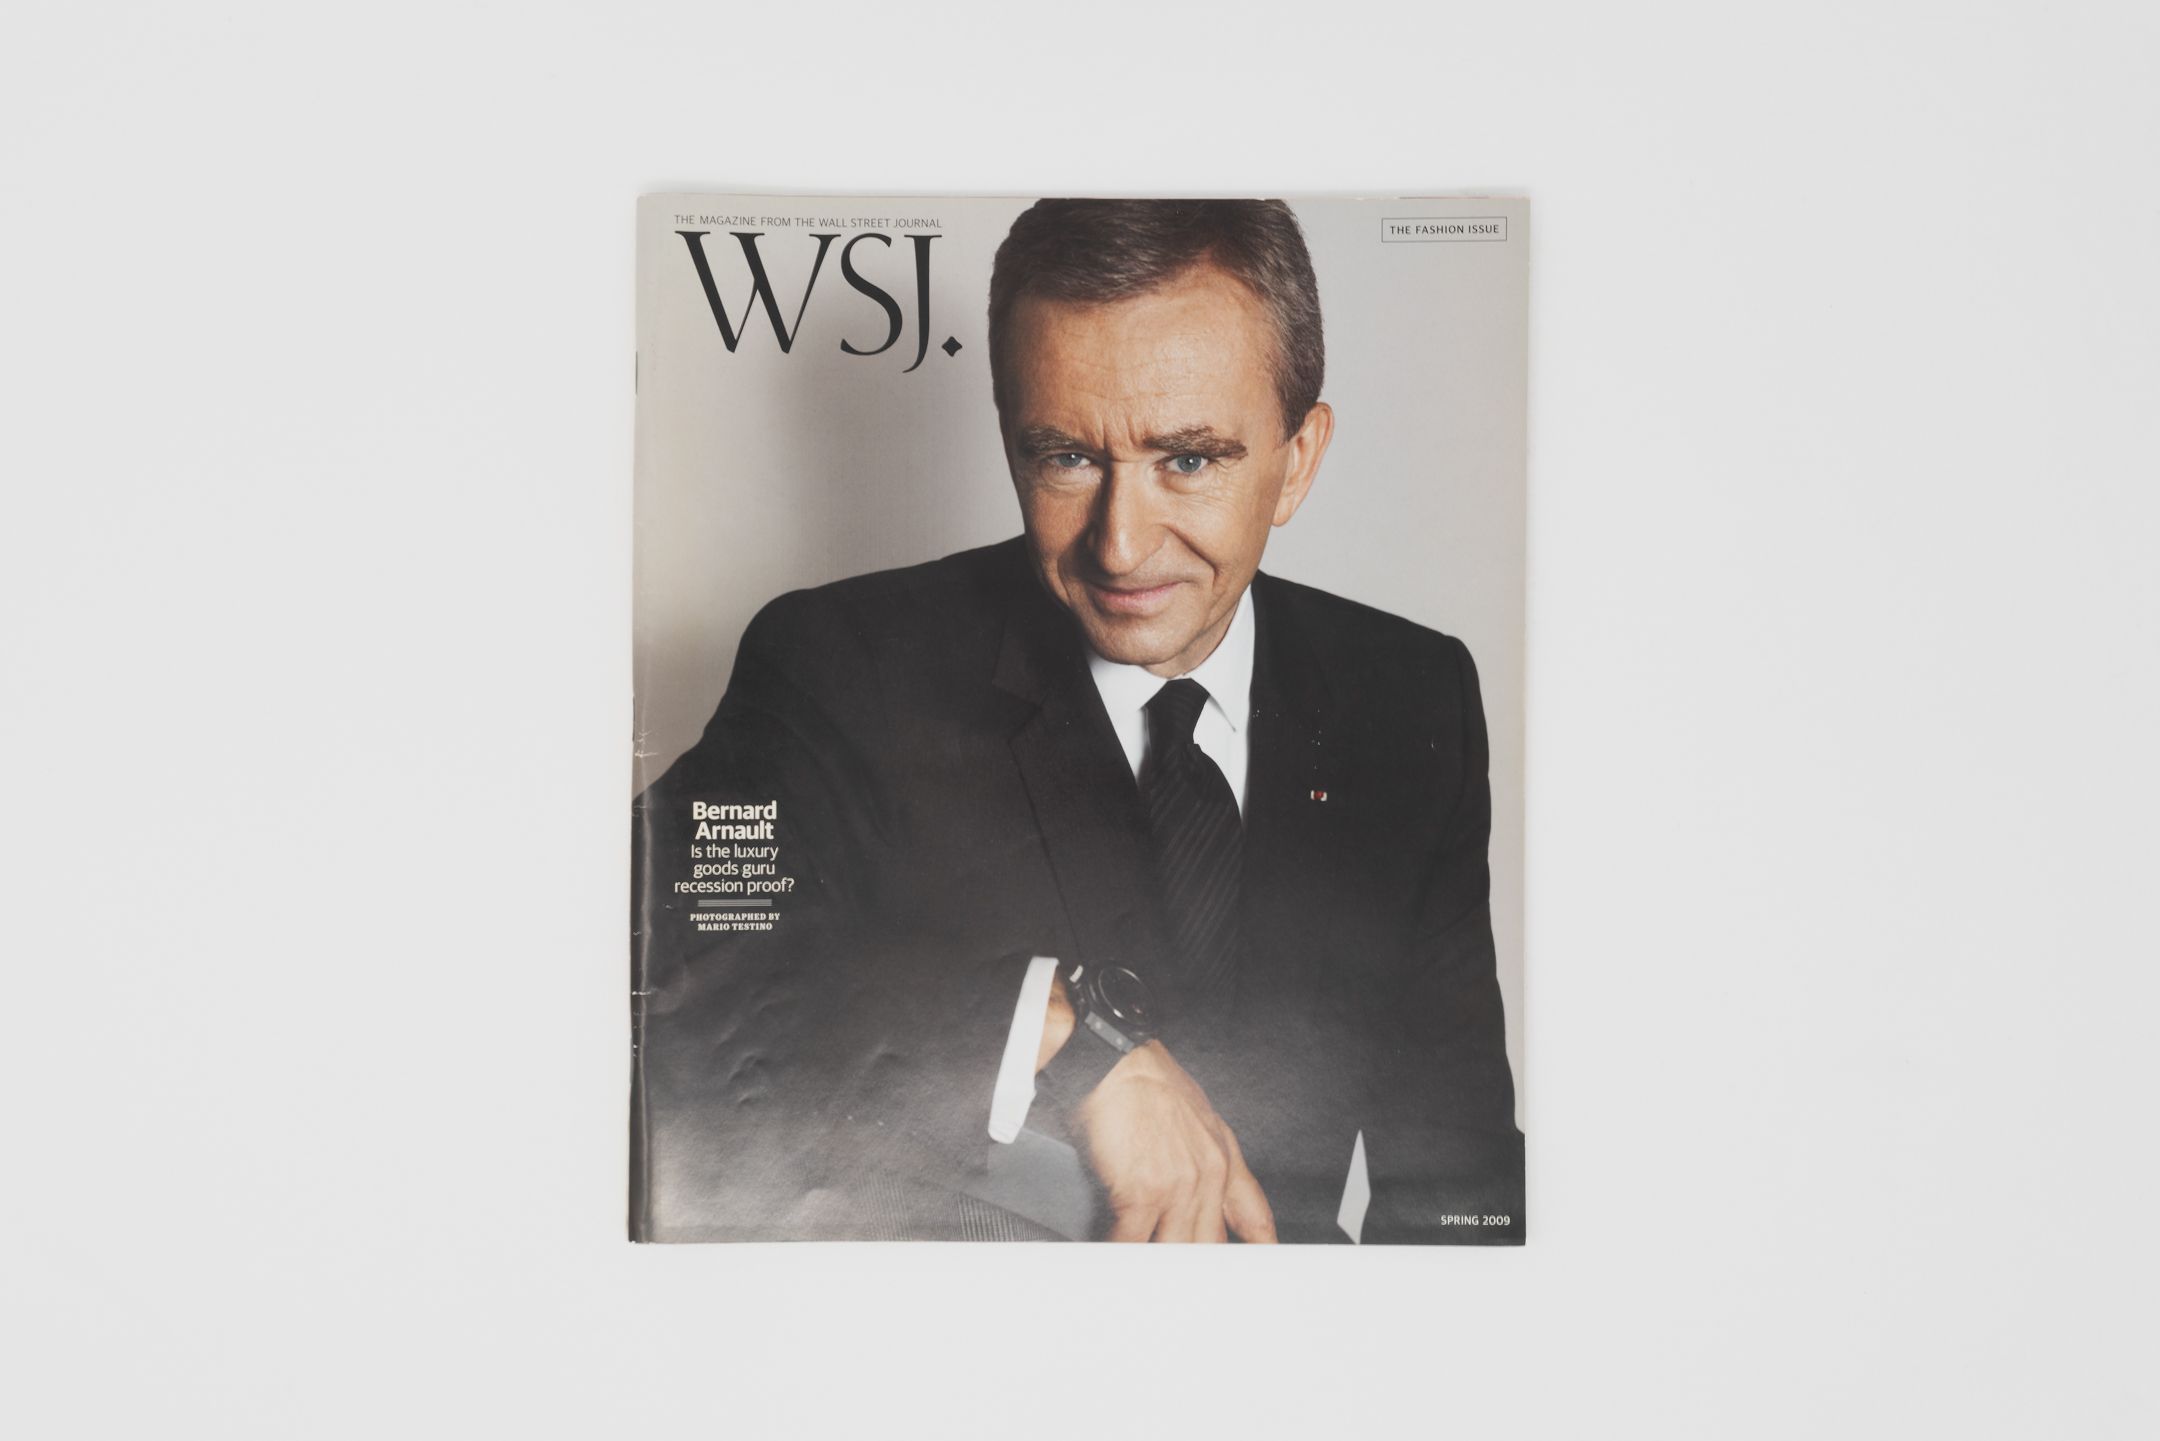 Bernard Arnault looks like he's wearing a quality suit and tie on the cover  of Wall Street Journal magazine. According t…